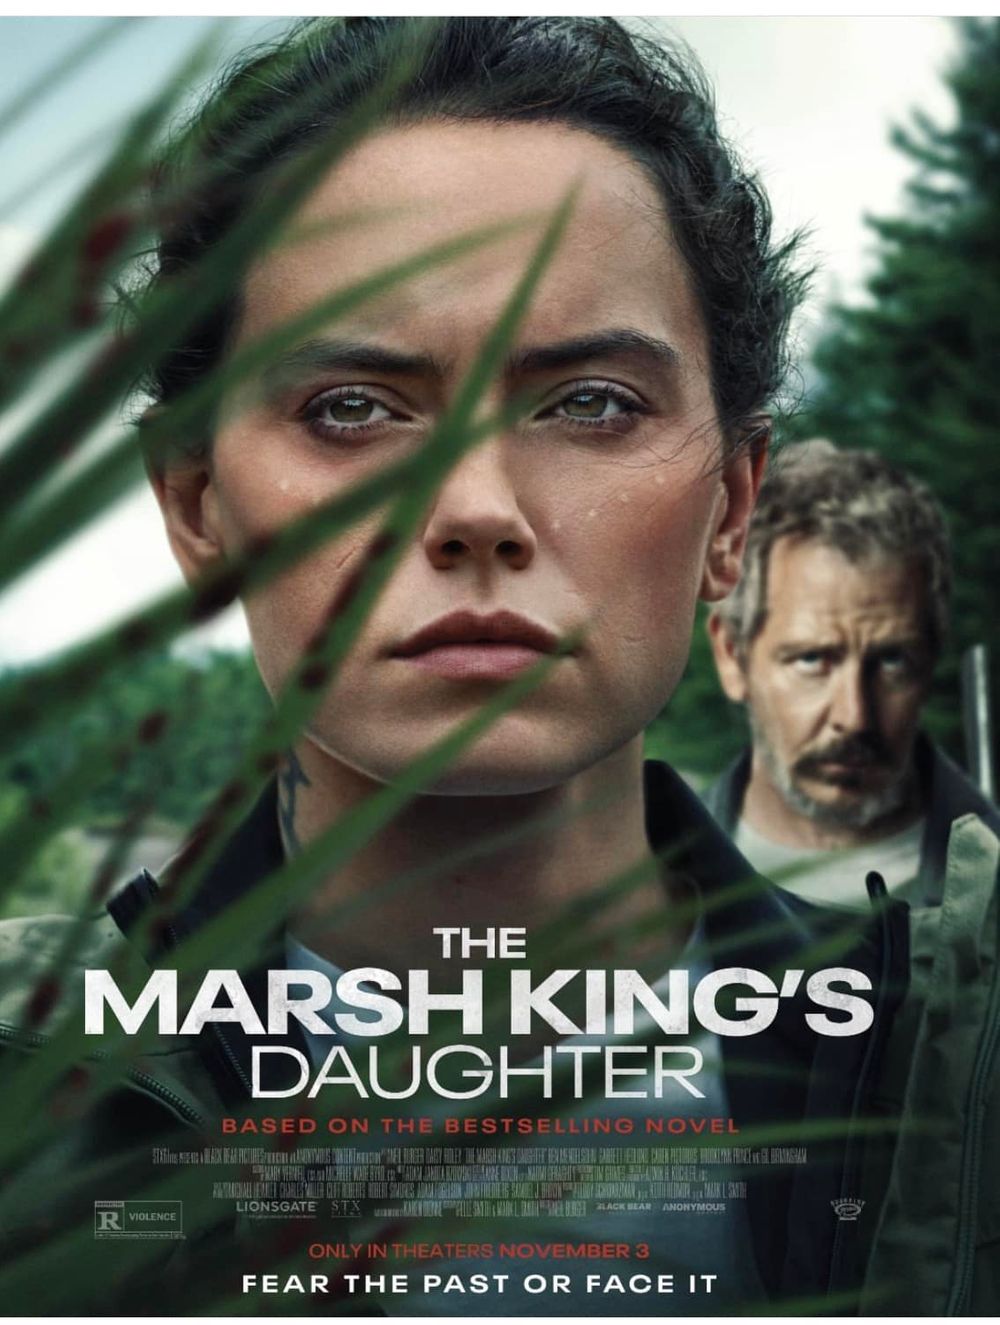 The Marsh Kings Daughter Movie Review